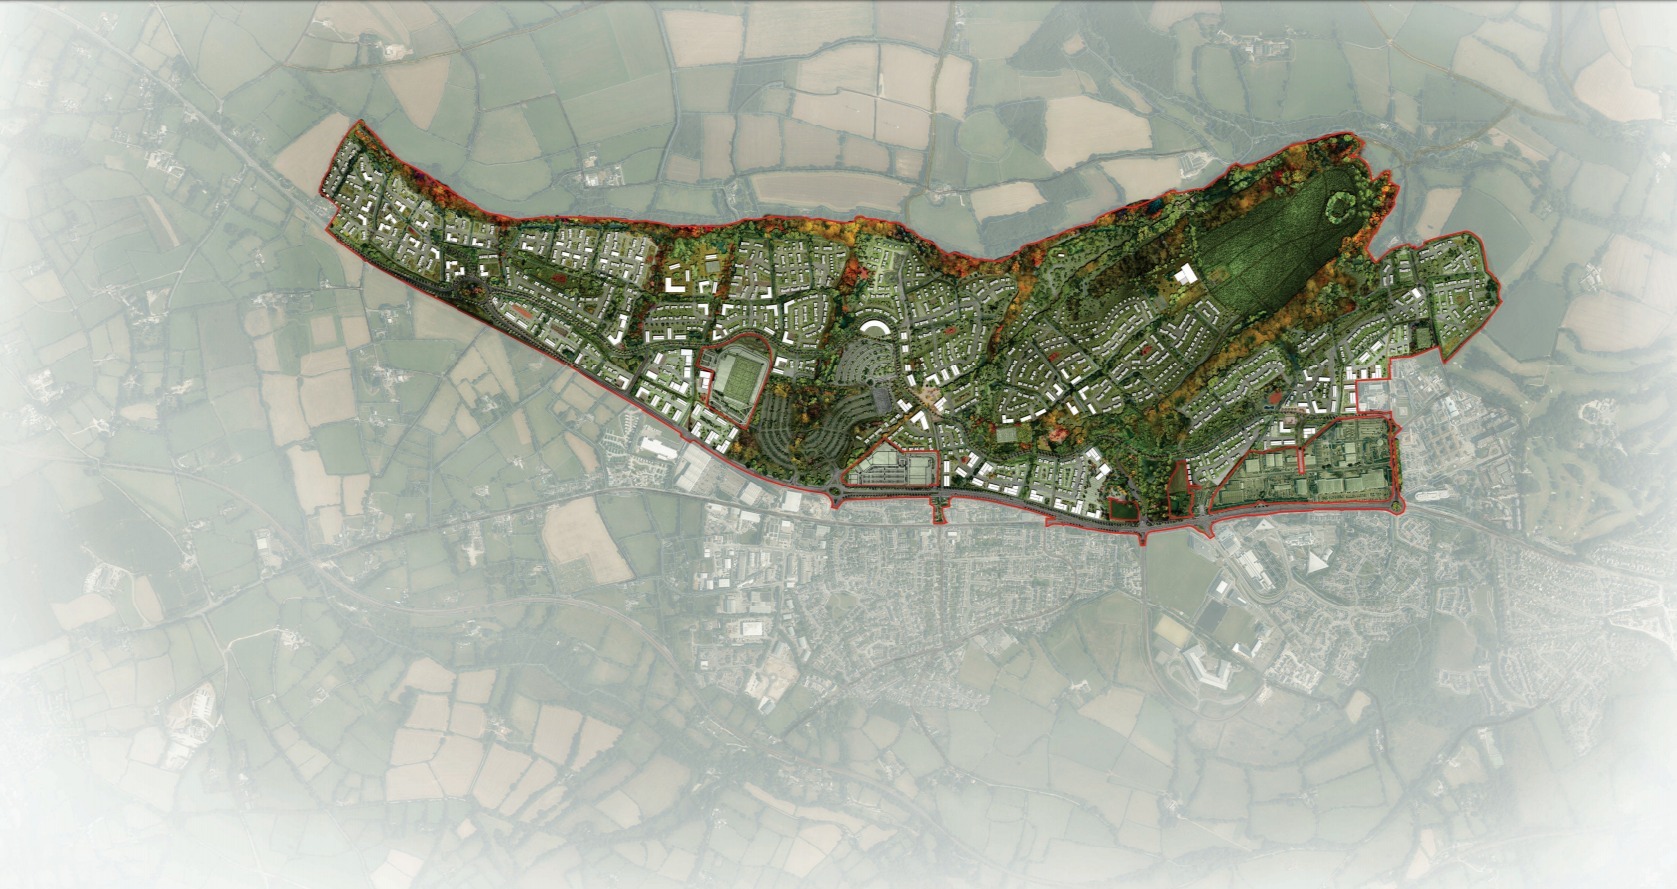 Aerial plan showing the potential layout of the Langarth Garden Village